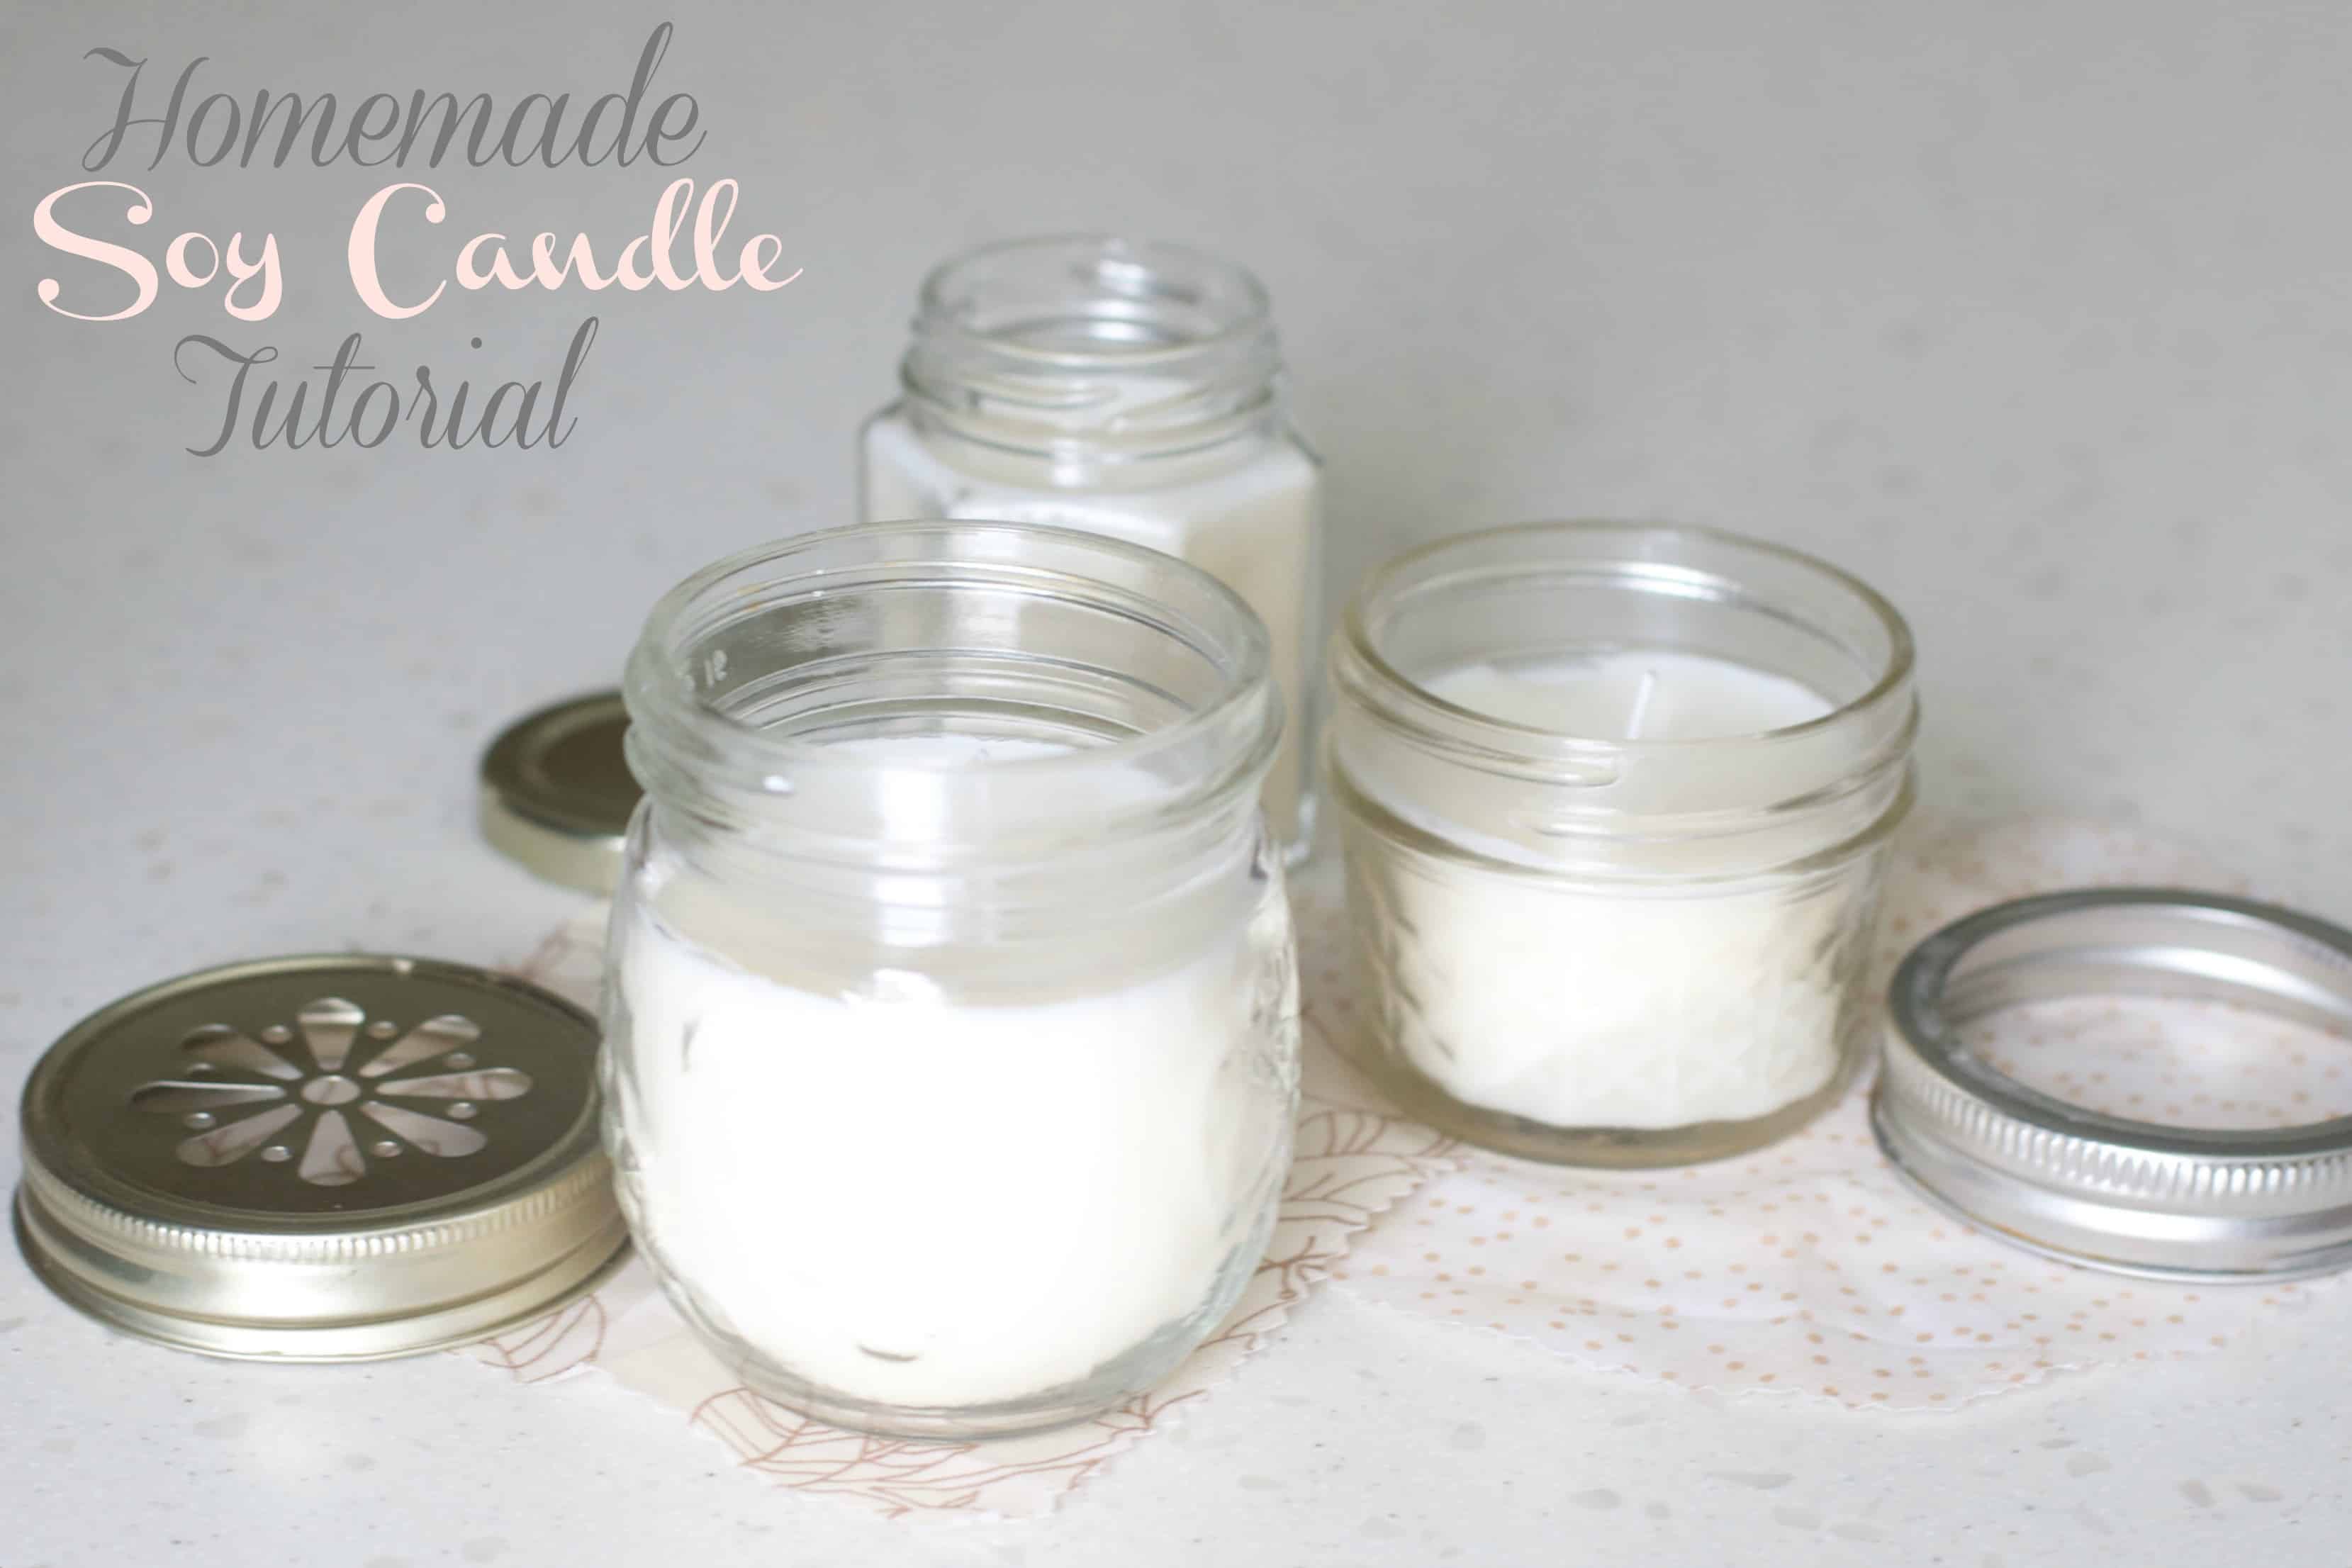 How to Make Soy Candles: A Beginner's Guide  Diy candles scented, Candle  scents recipes, Making candles diy